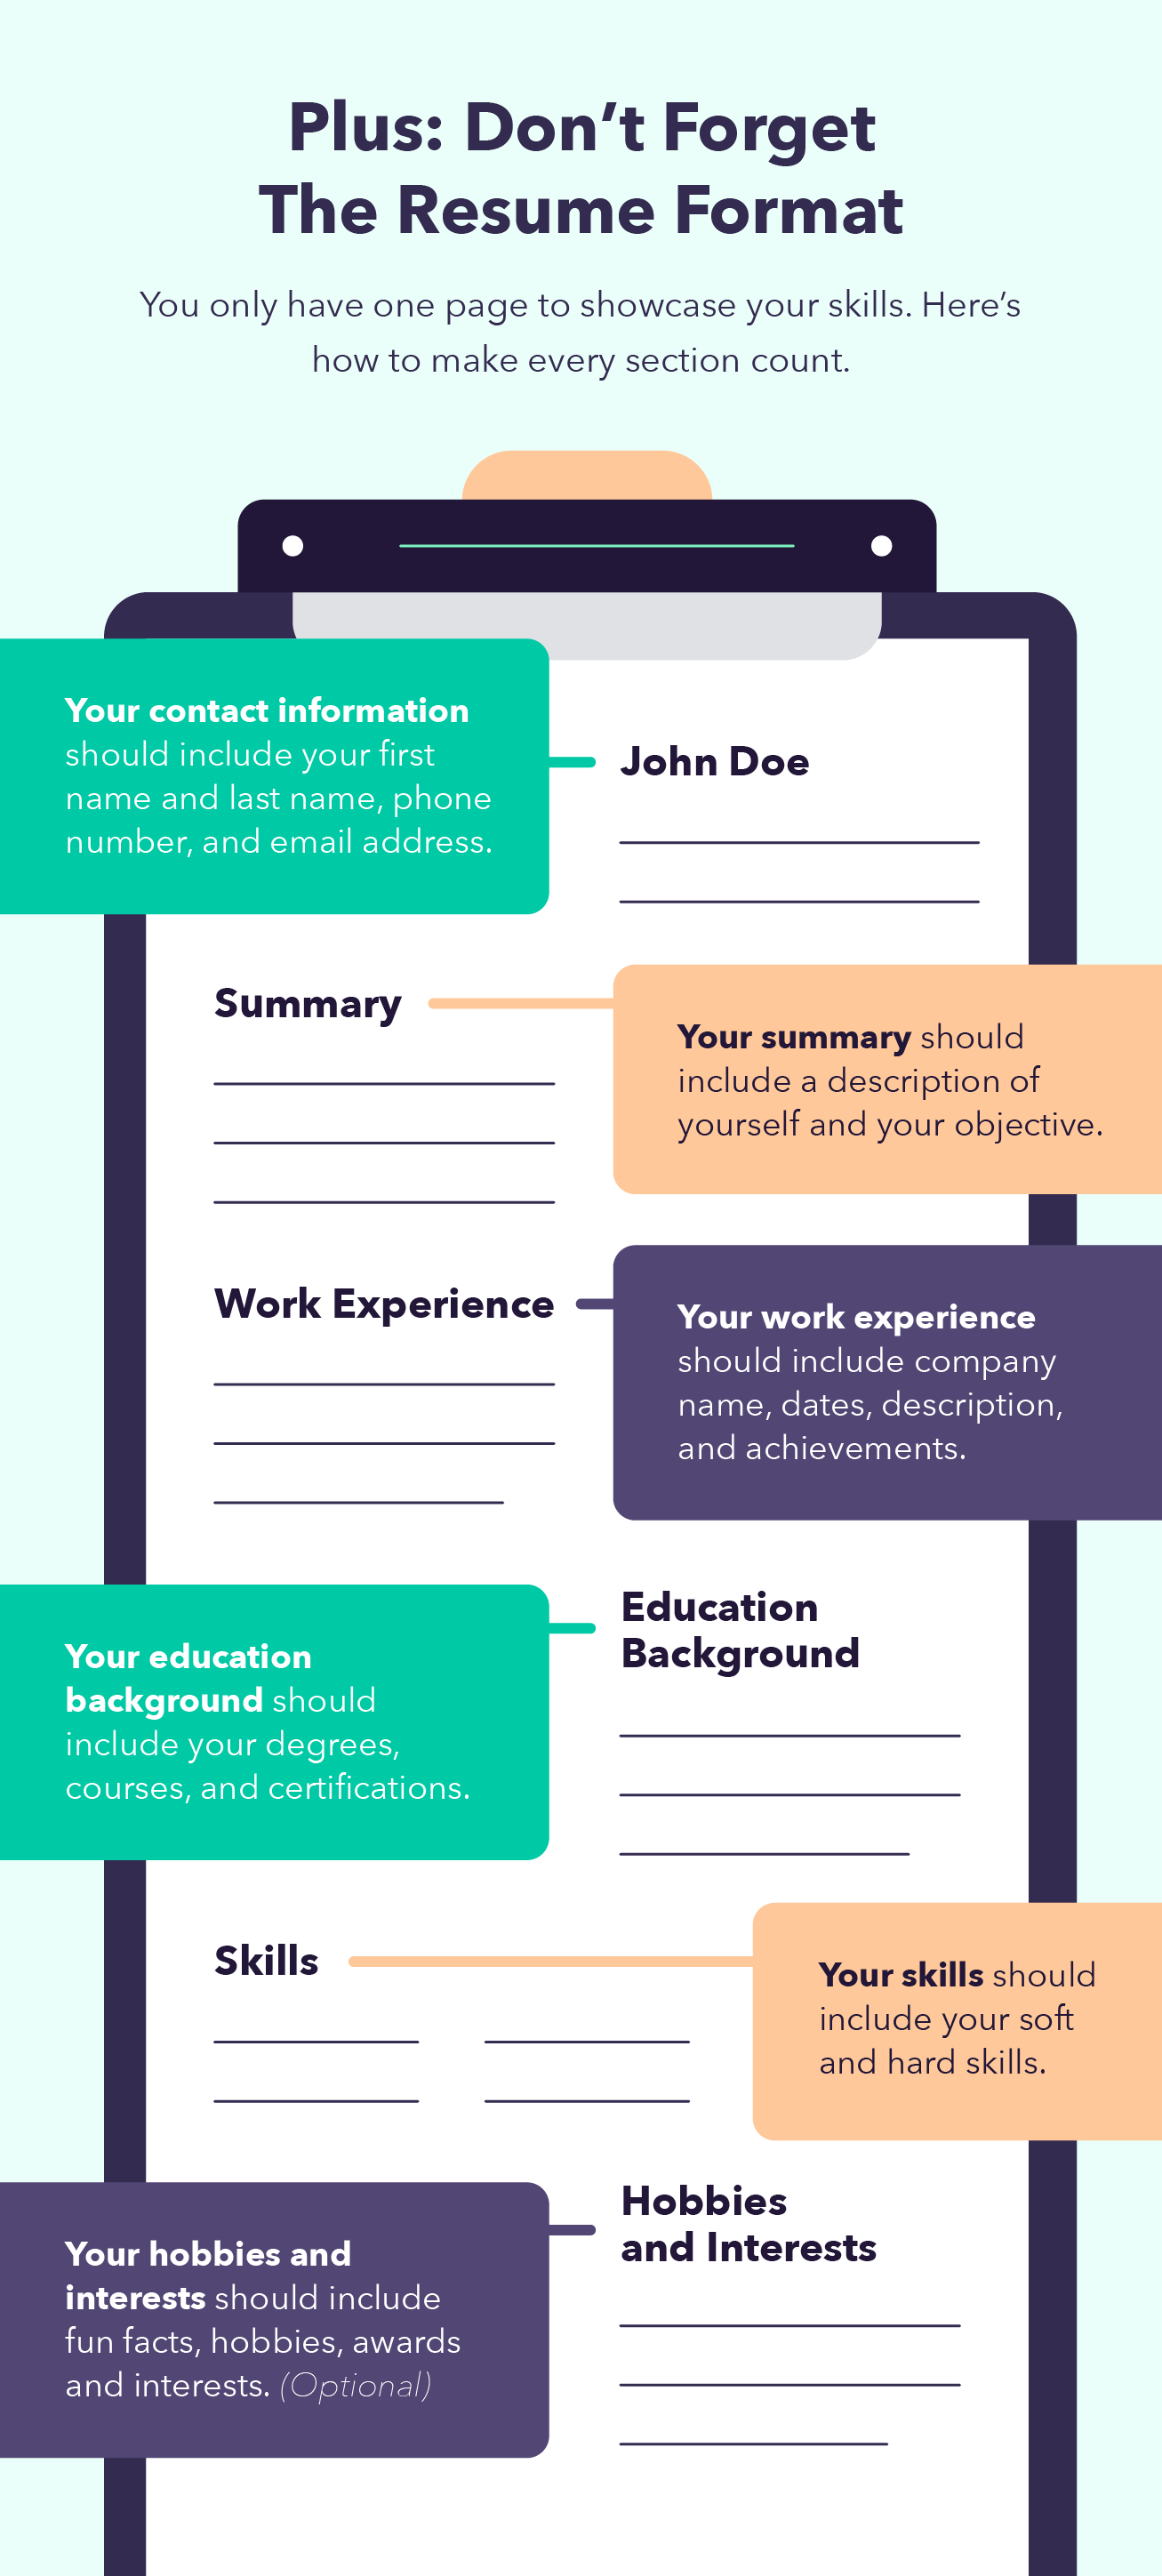 An illustration of an annotated resume describes what to include in each section of your first job resume.